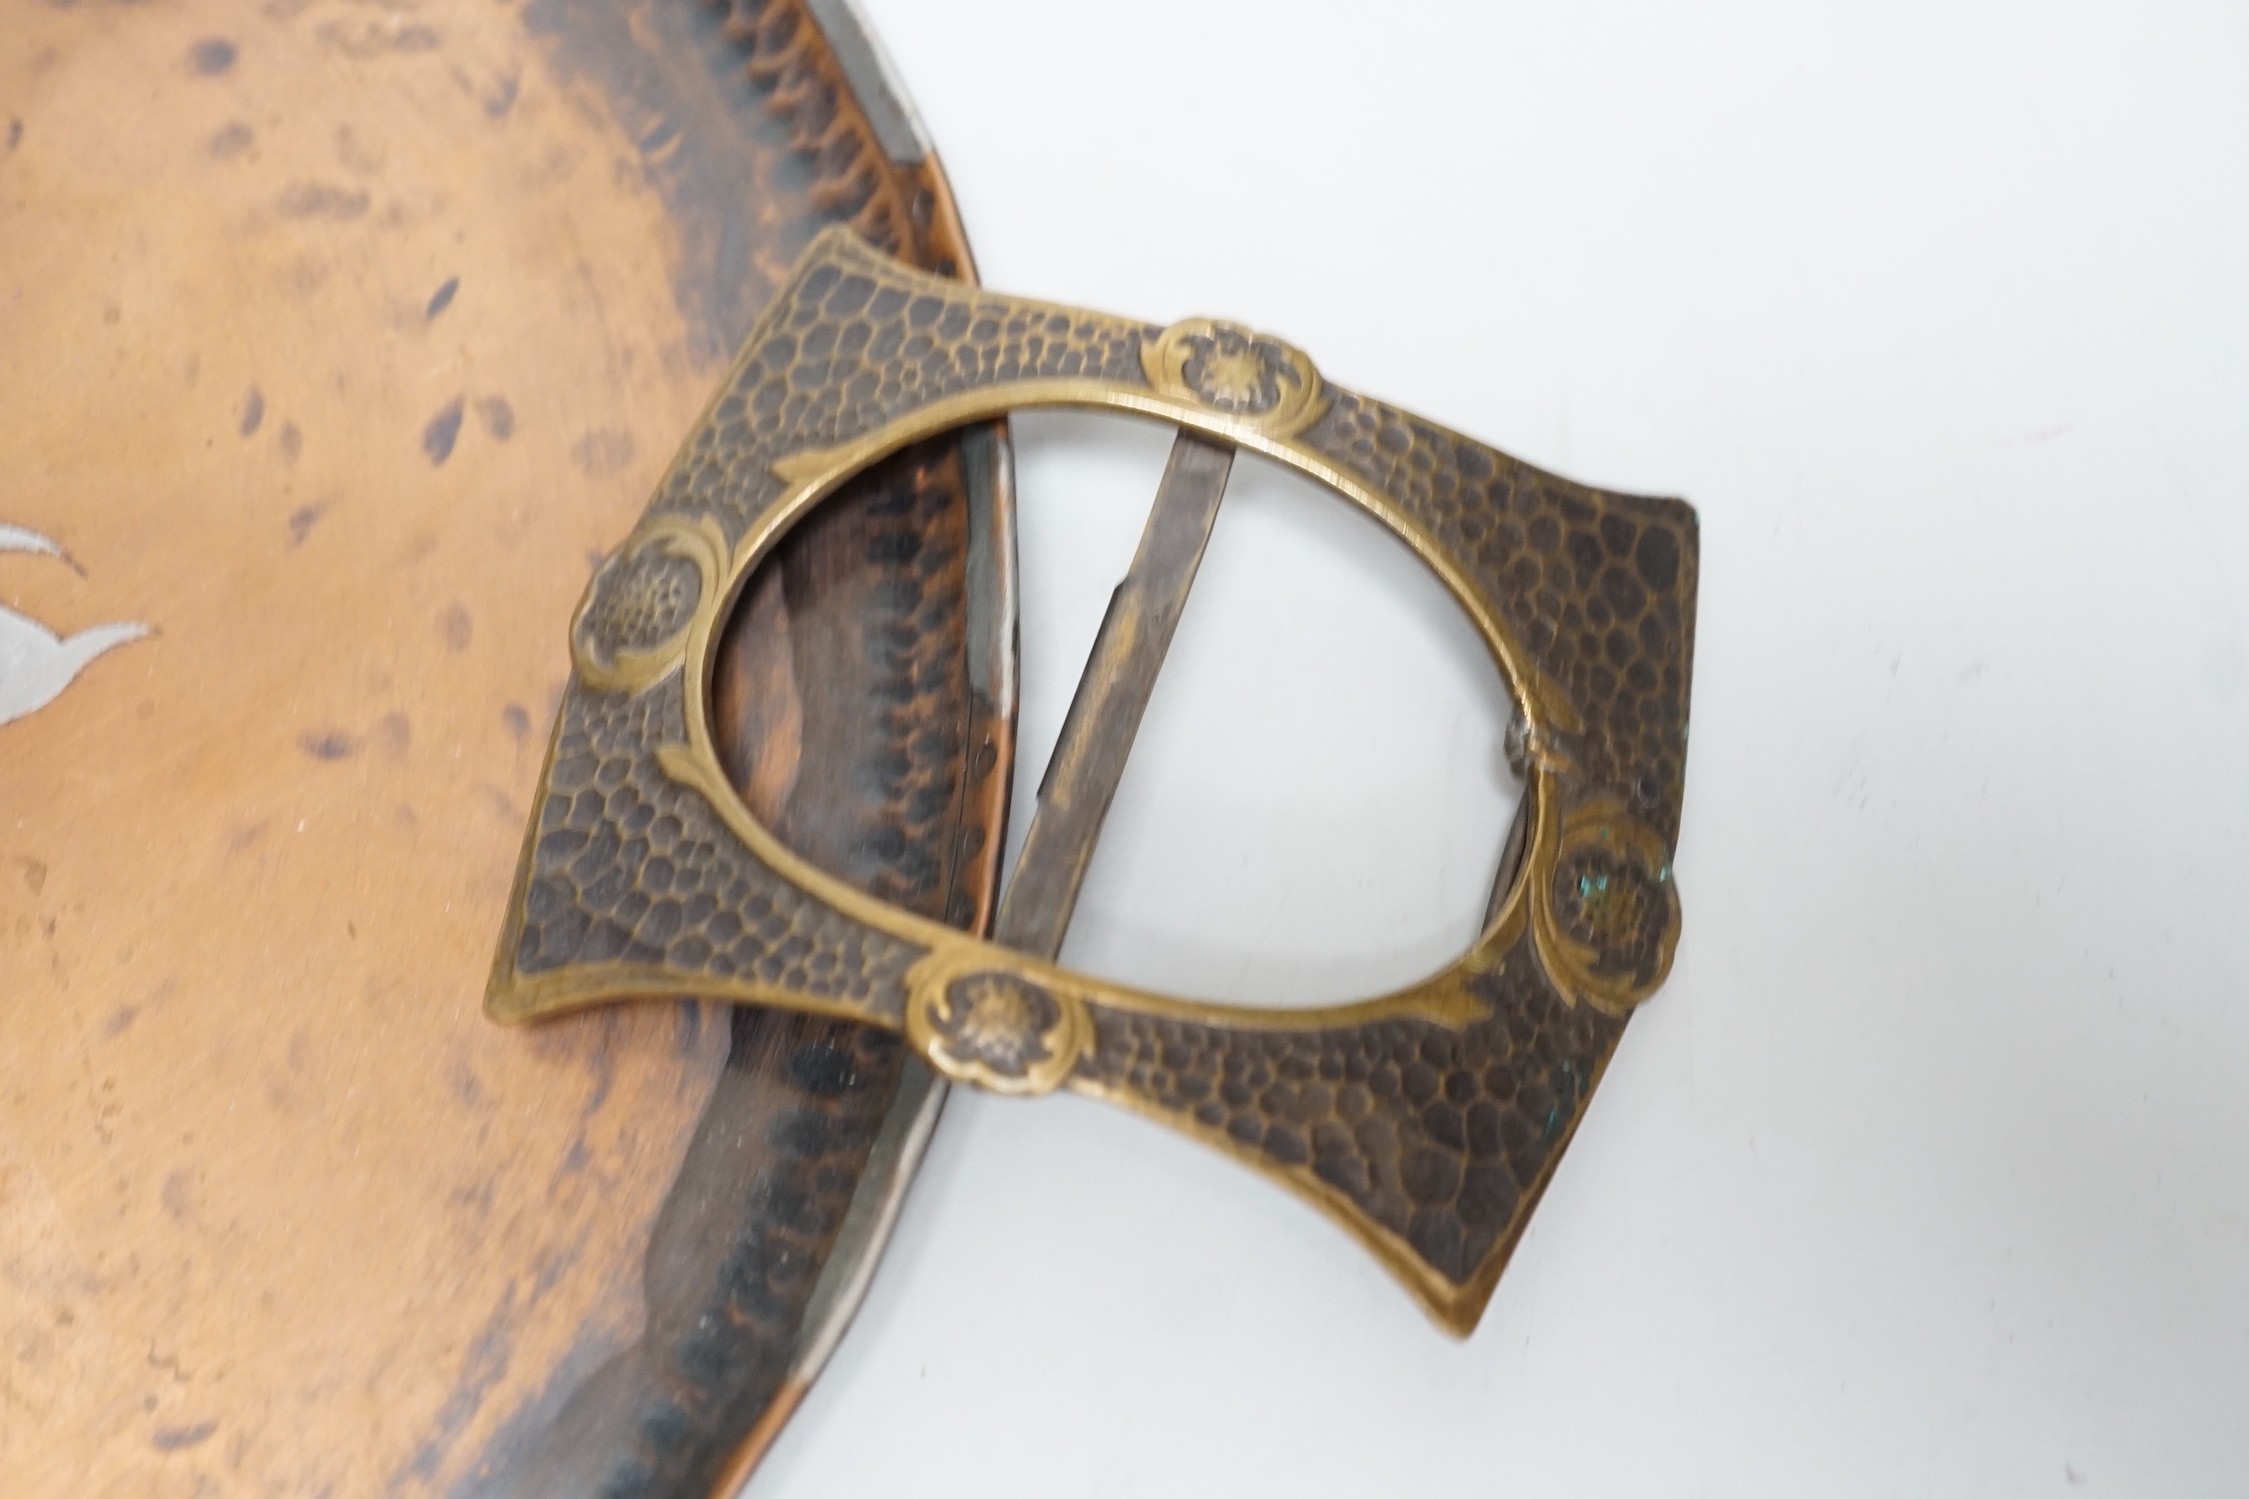 Paul Gillis. An Arts & Crafts copper tray and an Arts & Crafts buckle, tray 28cm diameter - Image 2 of 2